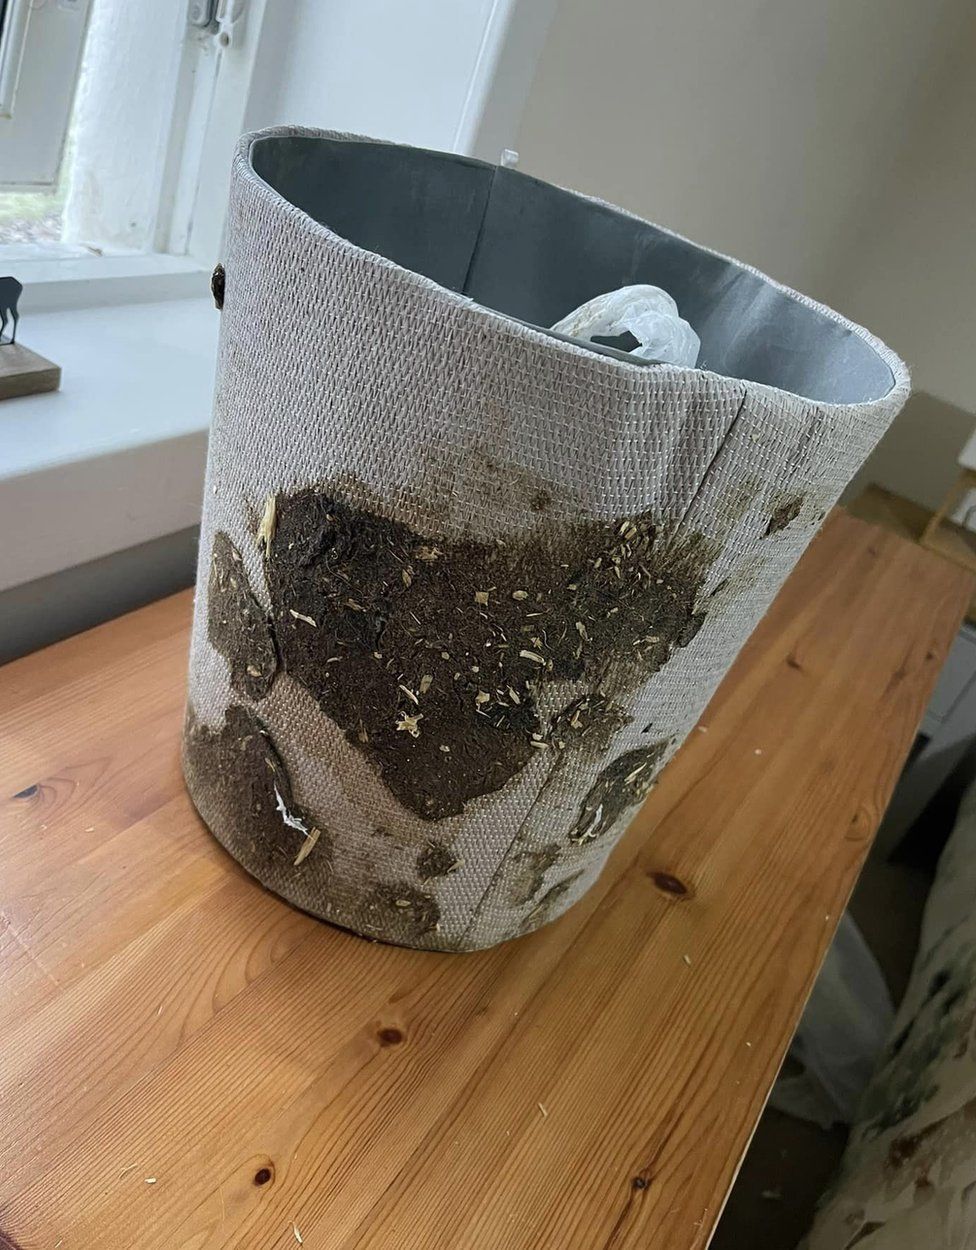 Waste paper bin covered in dog faeces